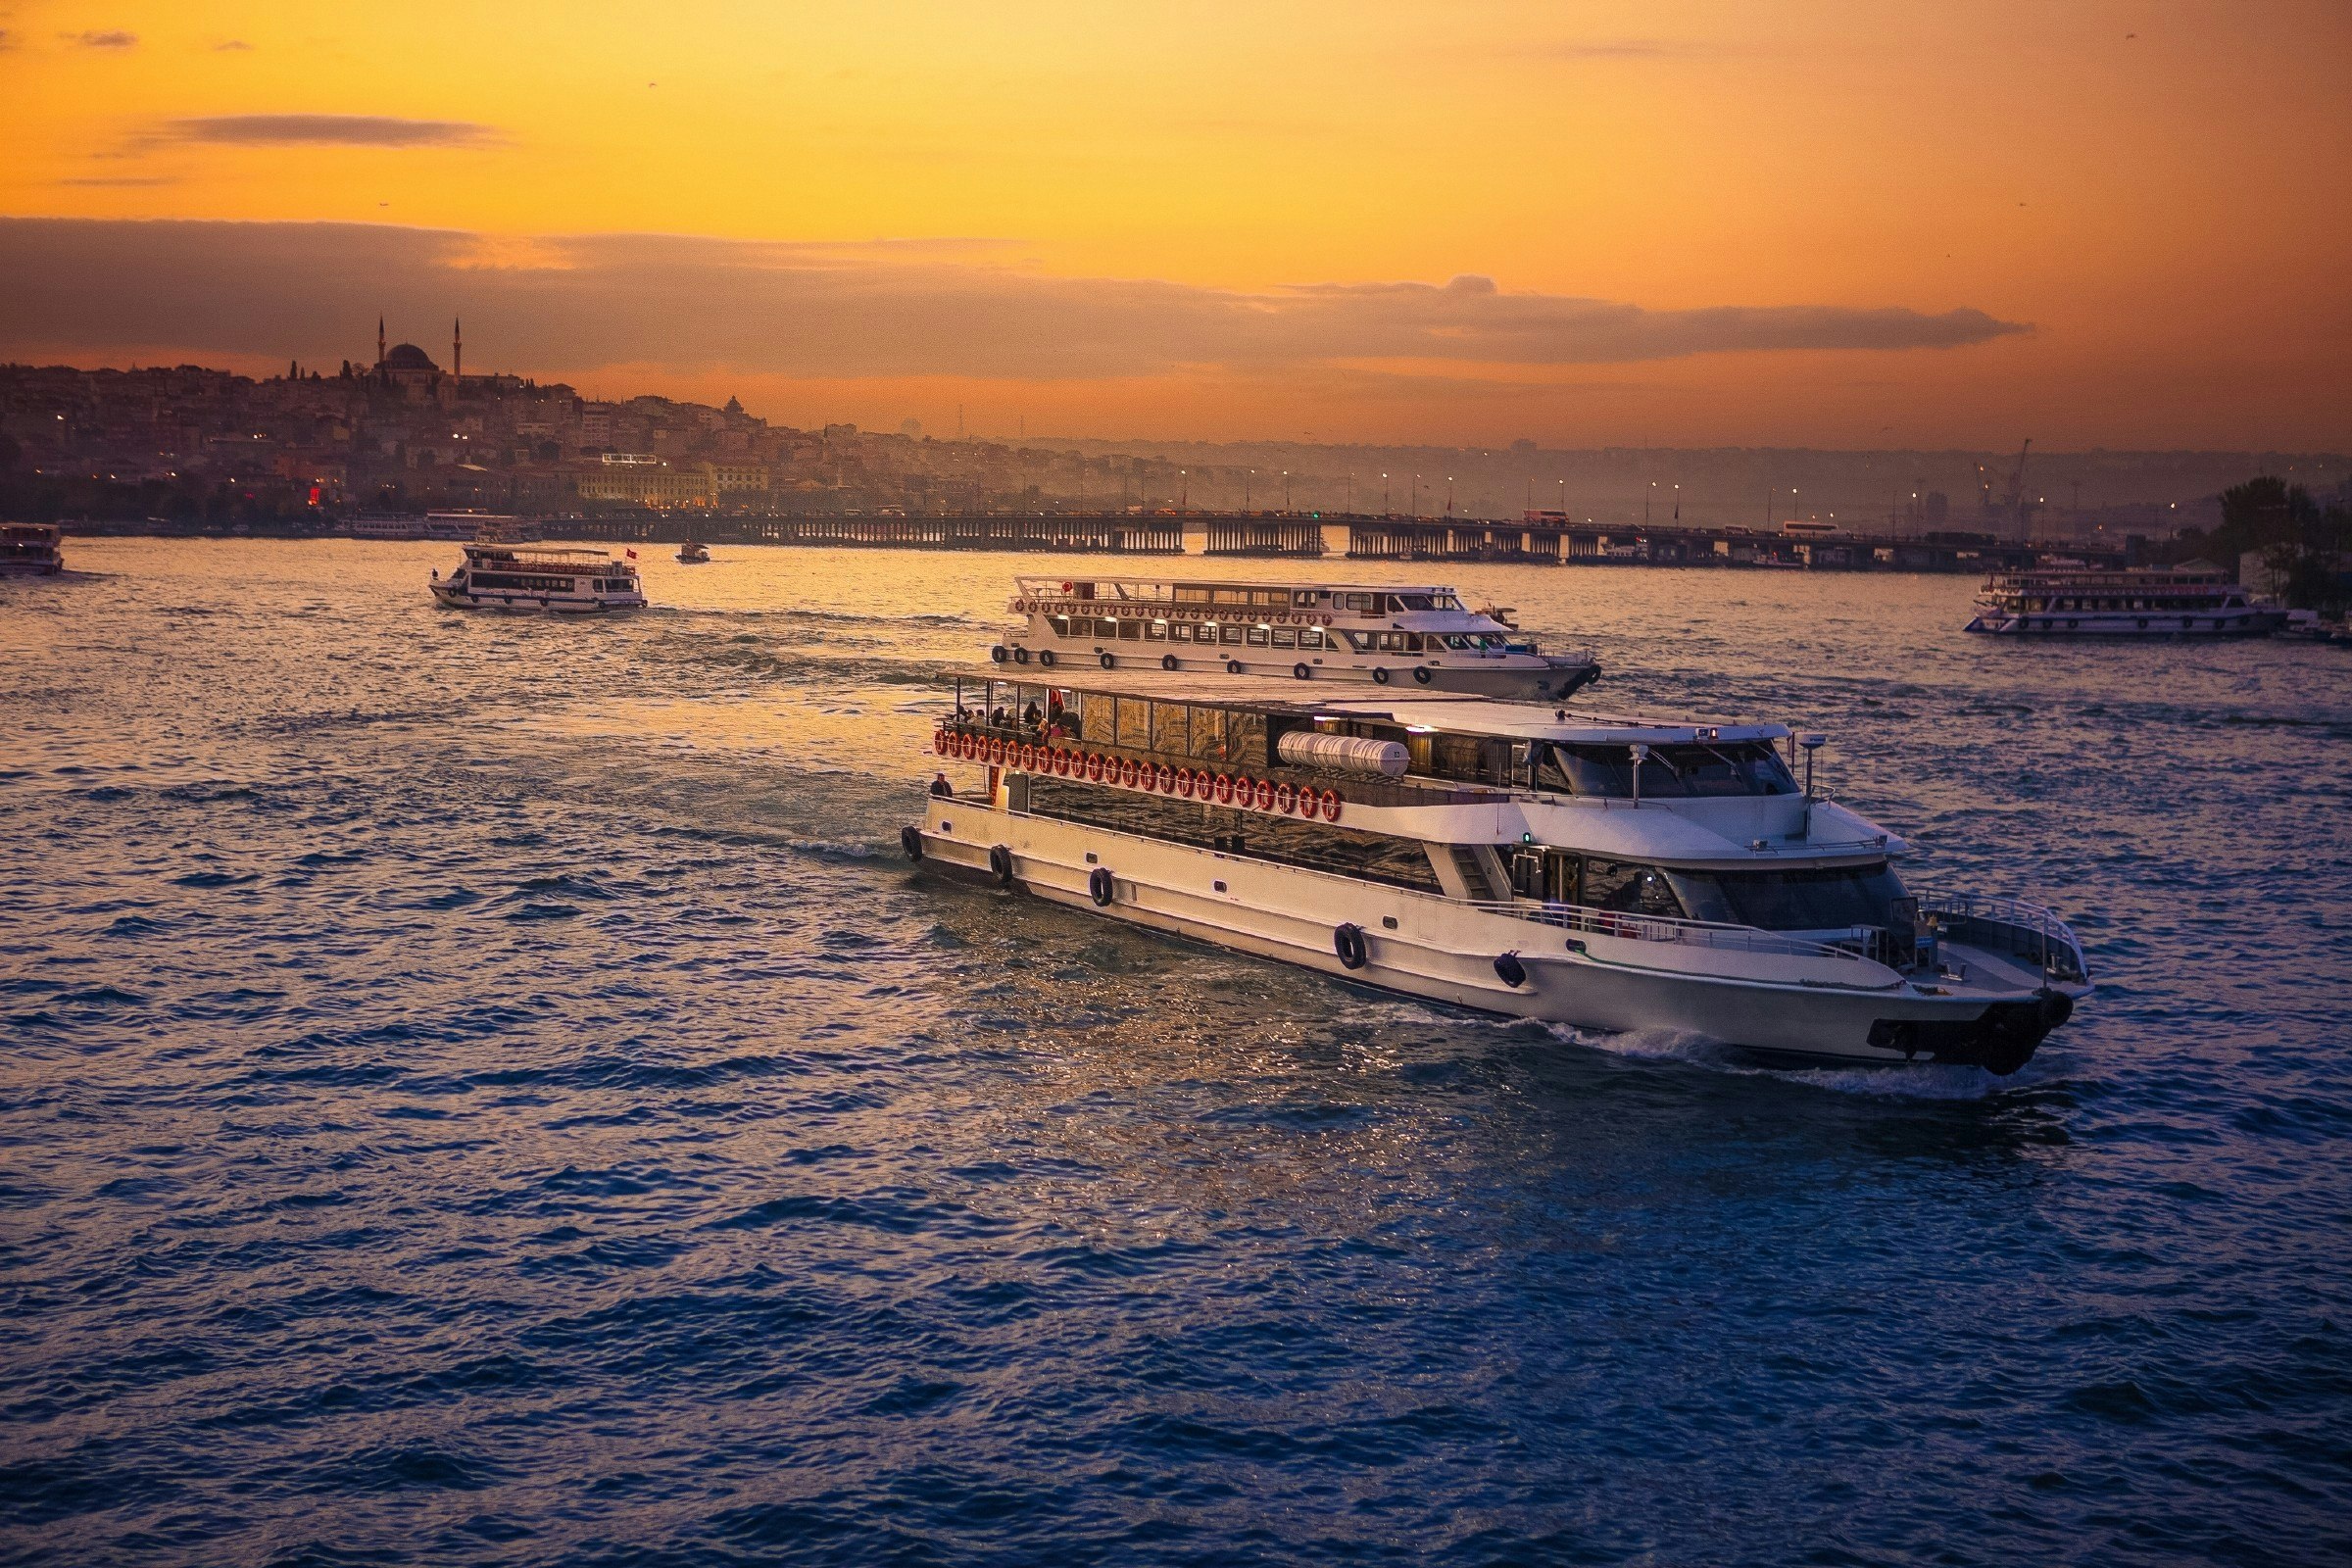 A view from the Galata towe of boats in the Bosporus